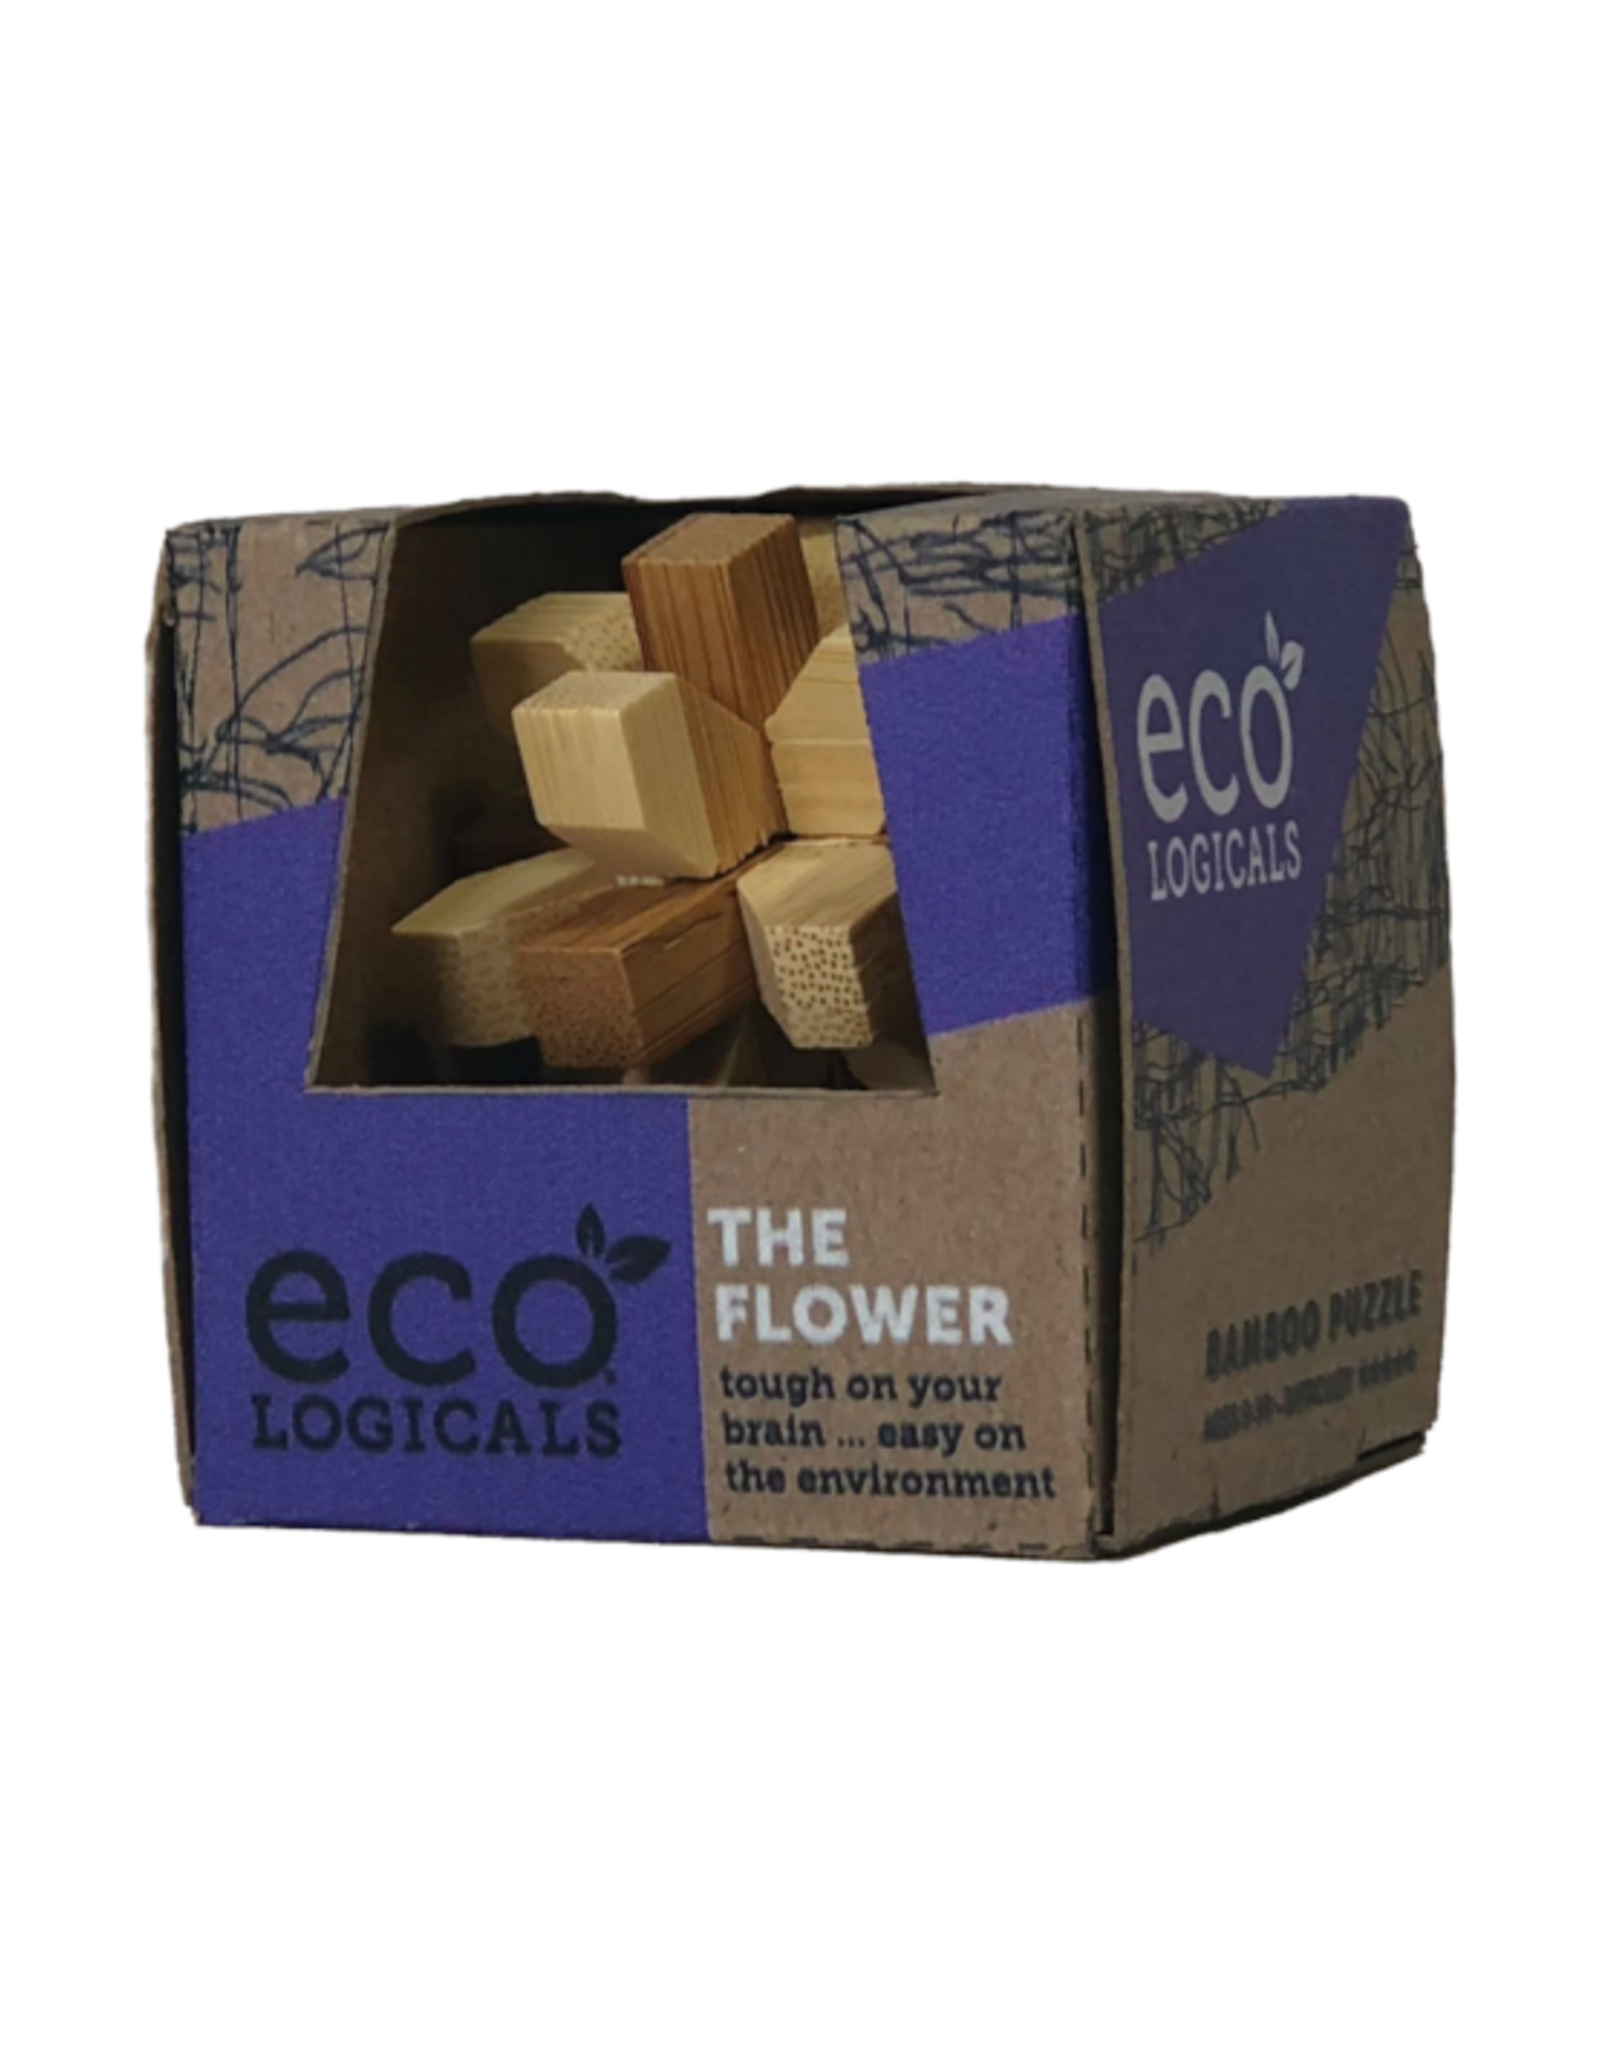 Eco Logicals - The Flower